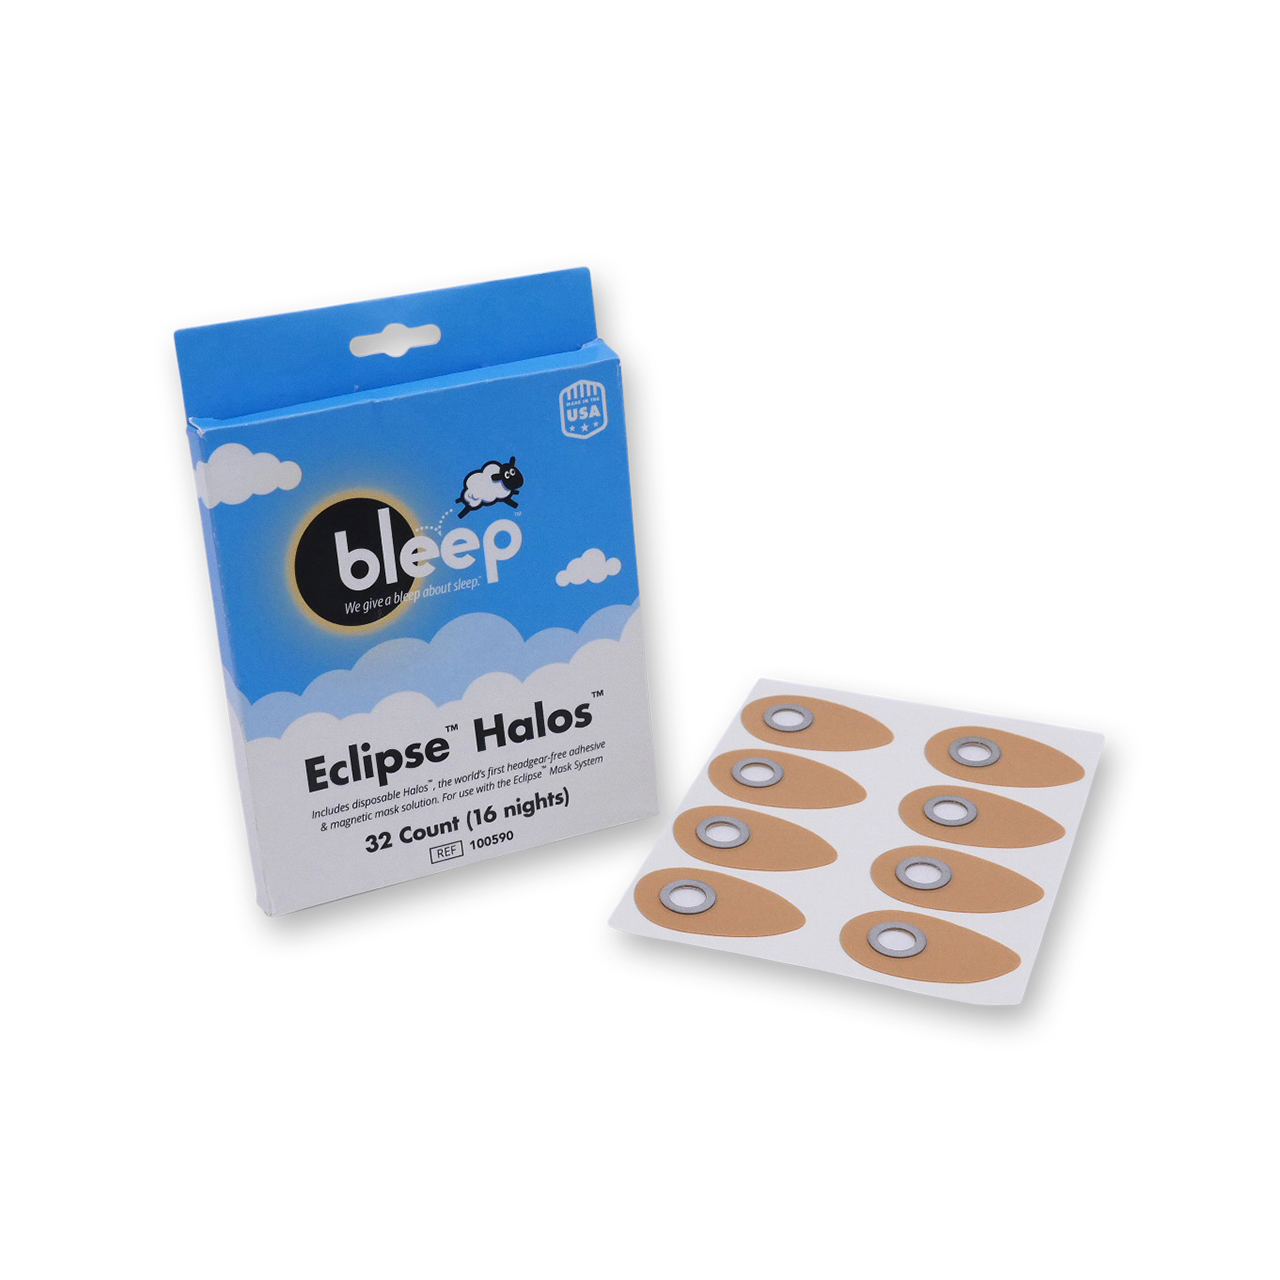 Photograph of CAP100631 Eclipse Halos next to their product packaging